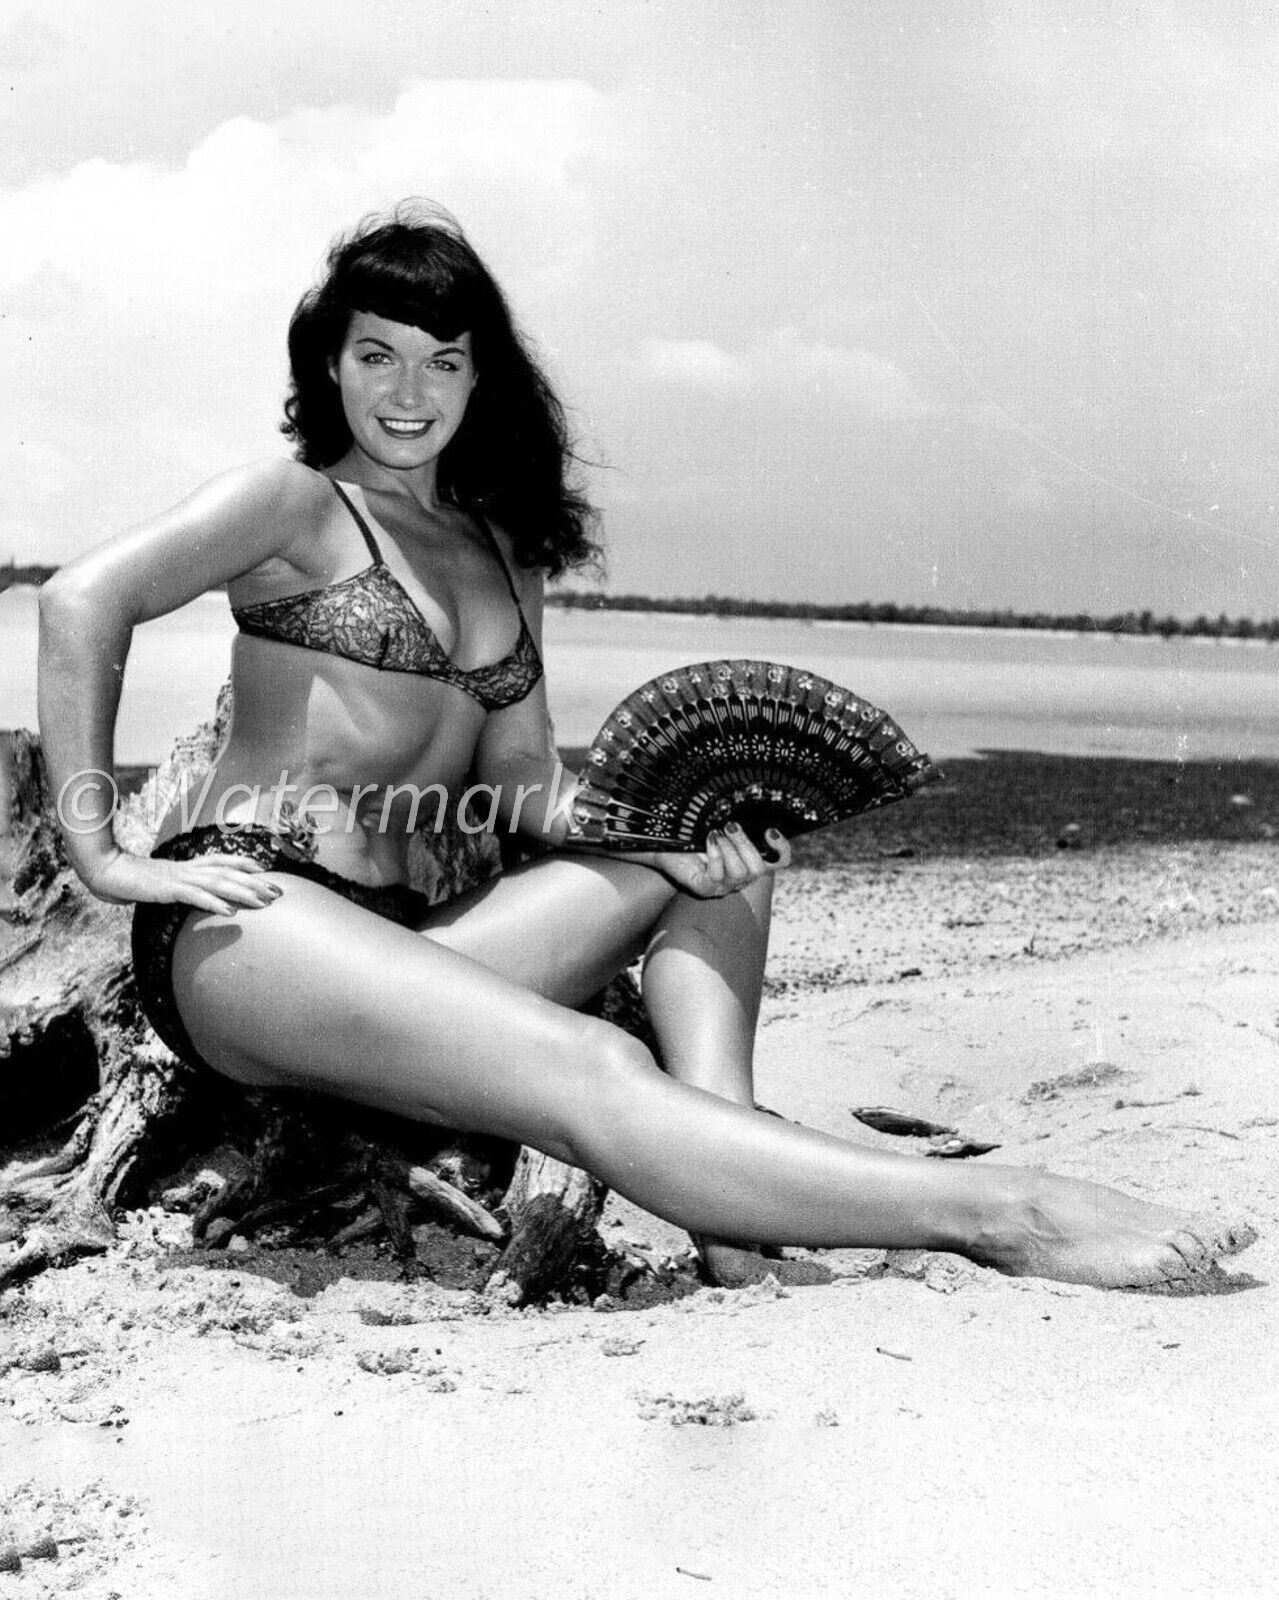 5x7 PUBLICITY PHOTO - BETTIE PAGE PIN UP VINTAGE  - 1950s Actress Model